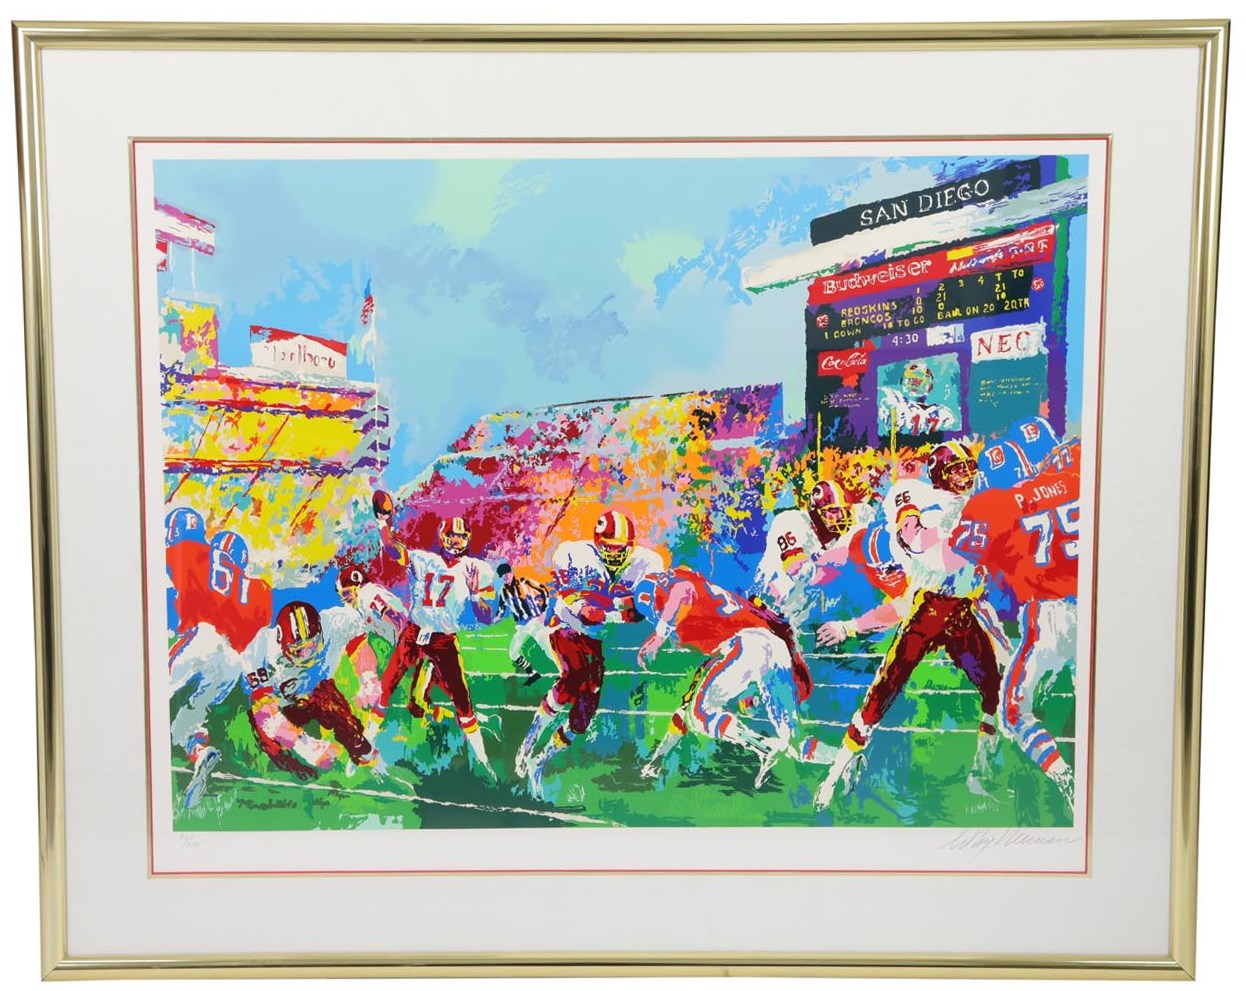 Artists - 1988 LeRoy Neiman Signed "In the Pocket" Serigraph